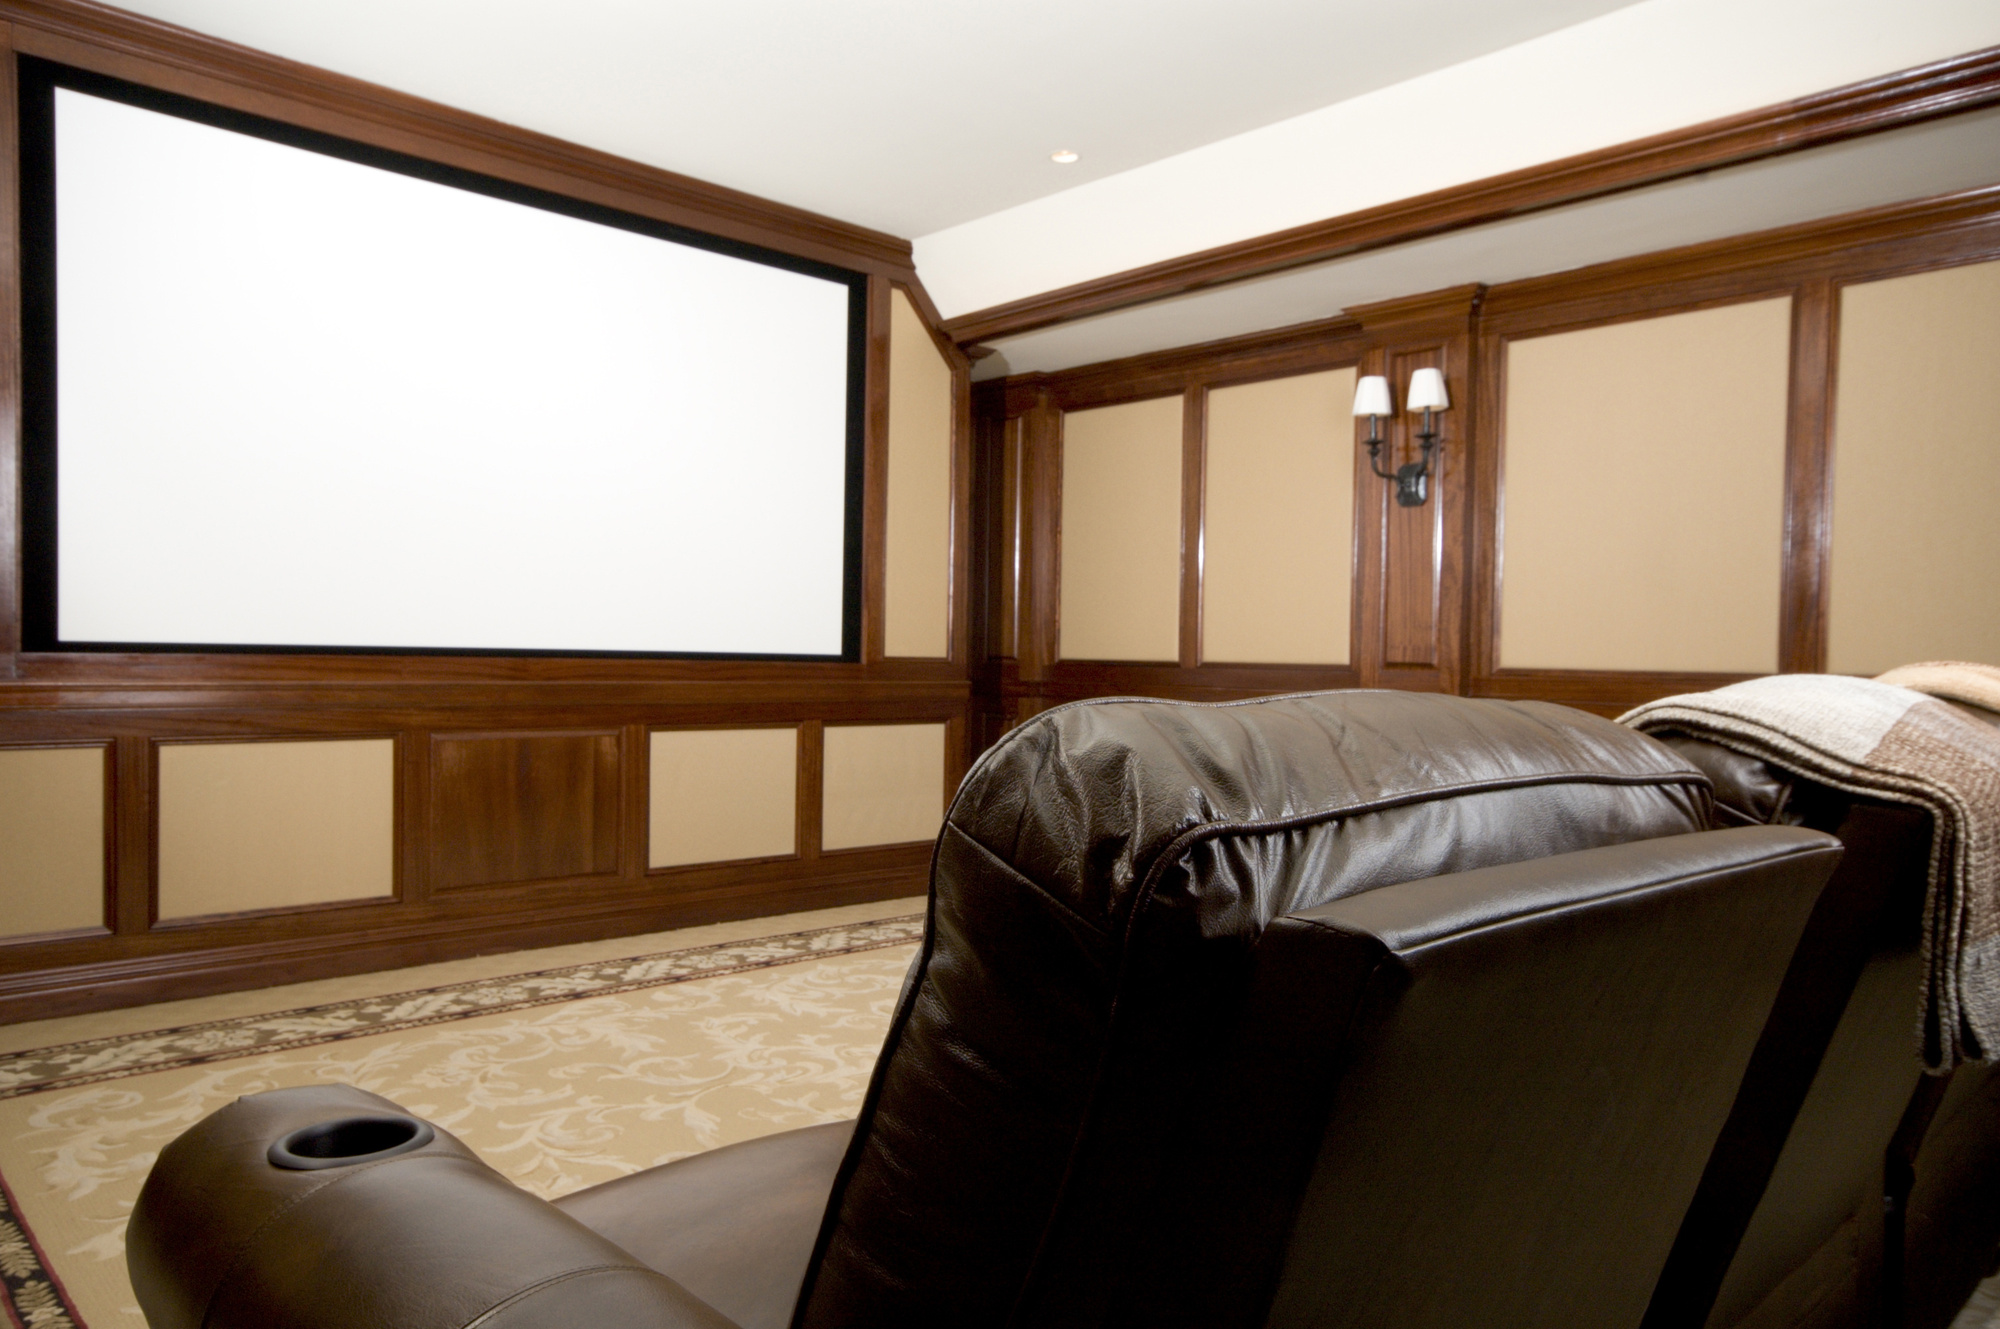 How much will a home cinema cost?